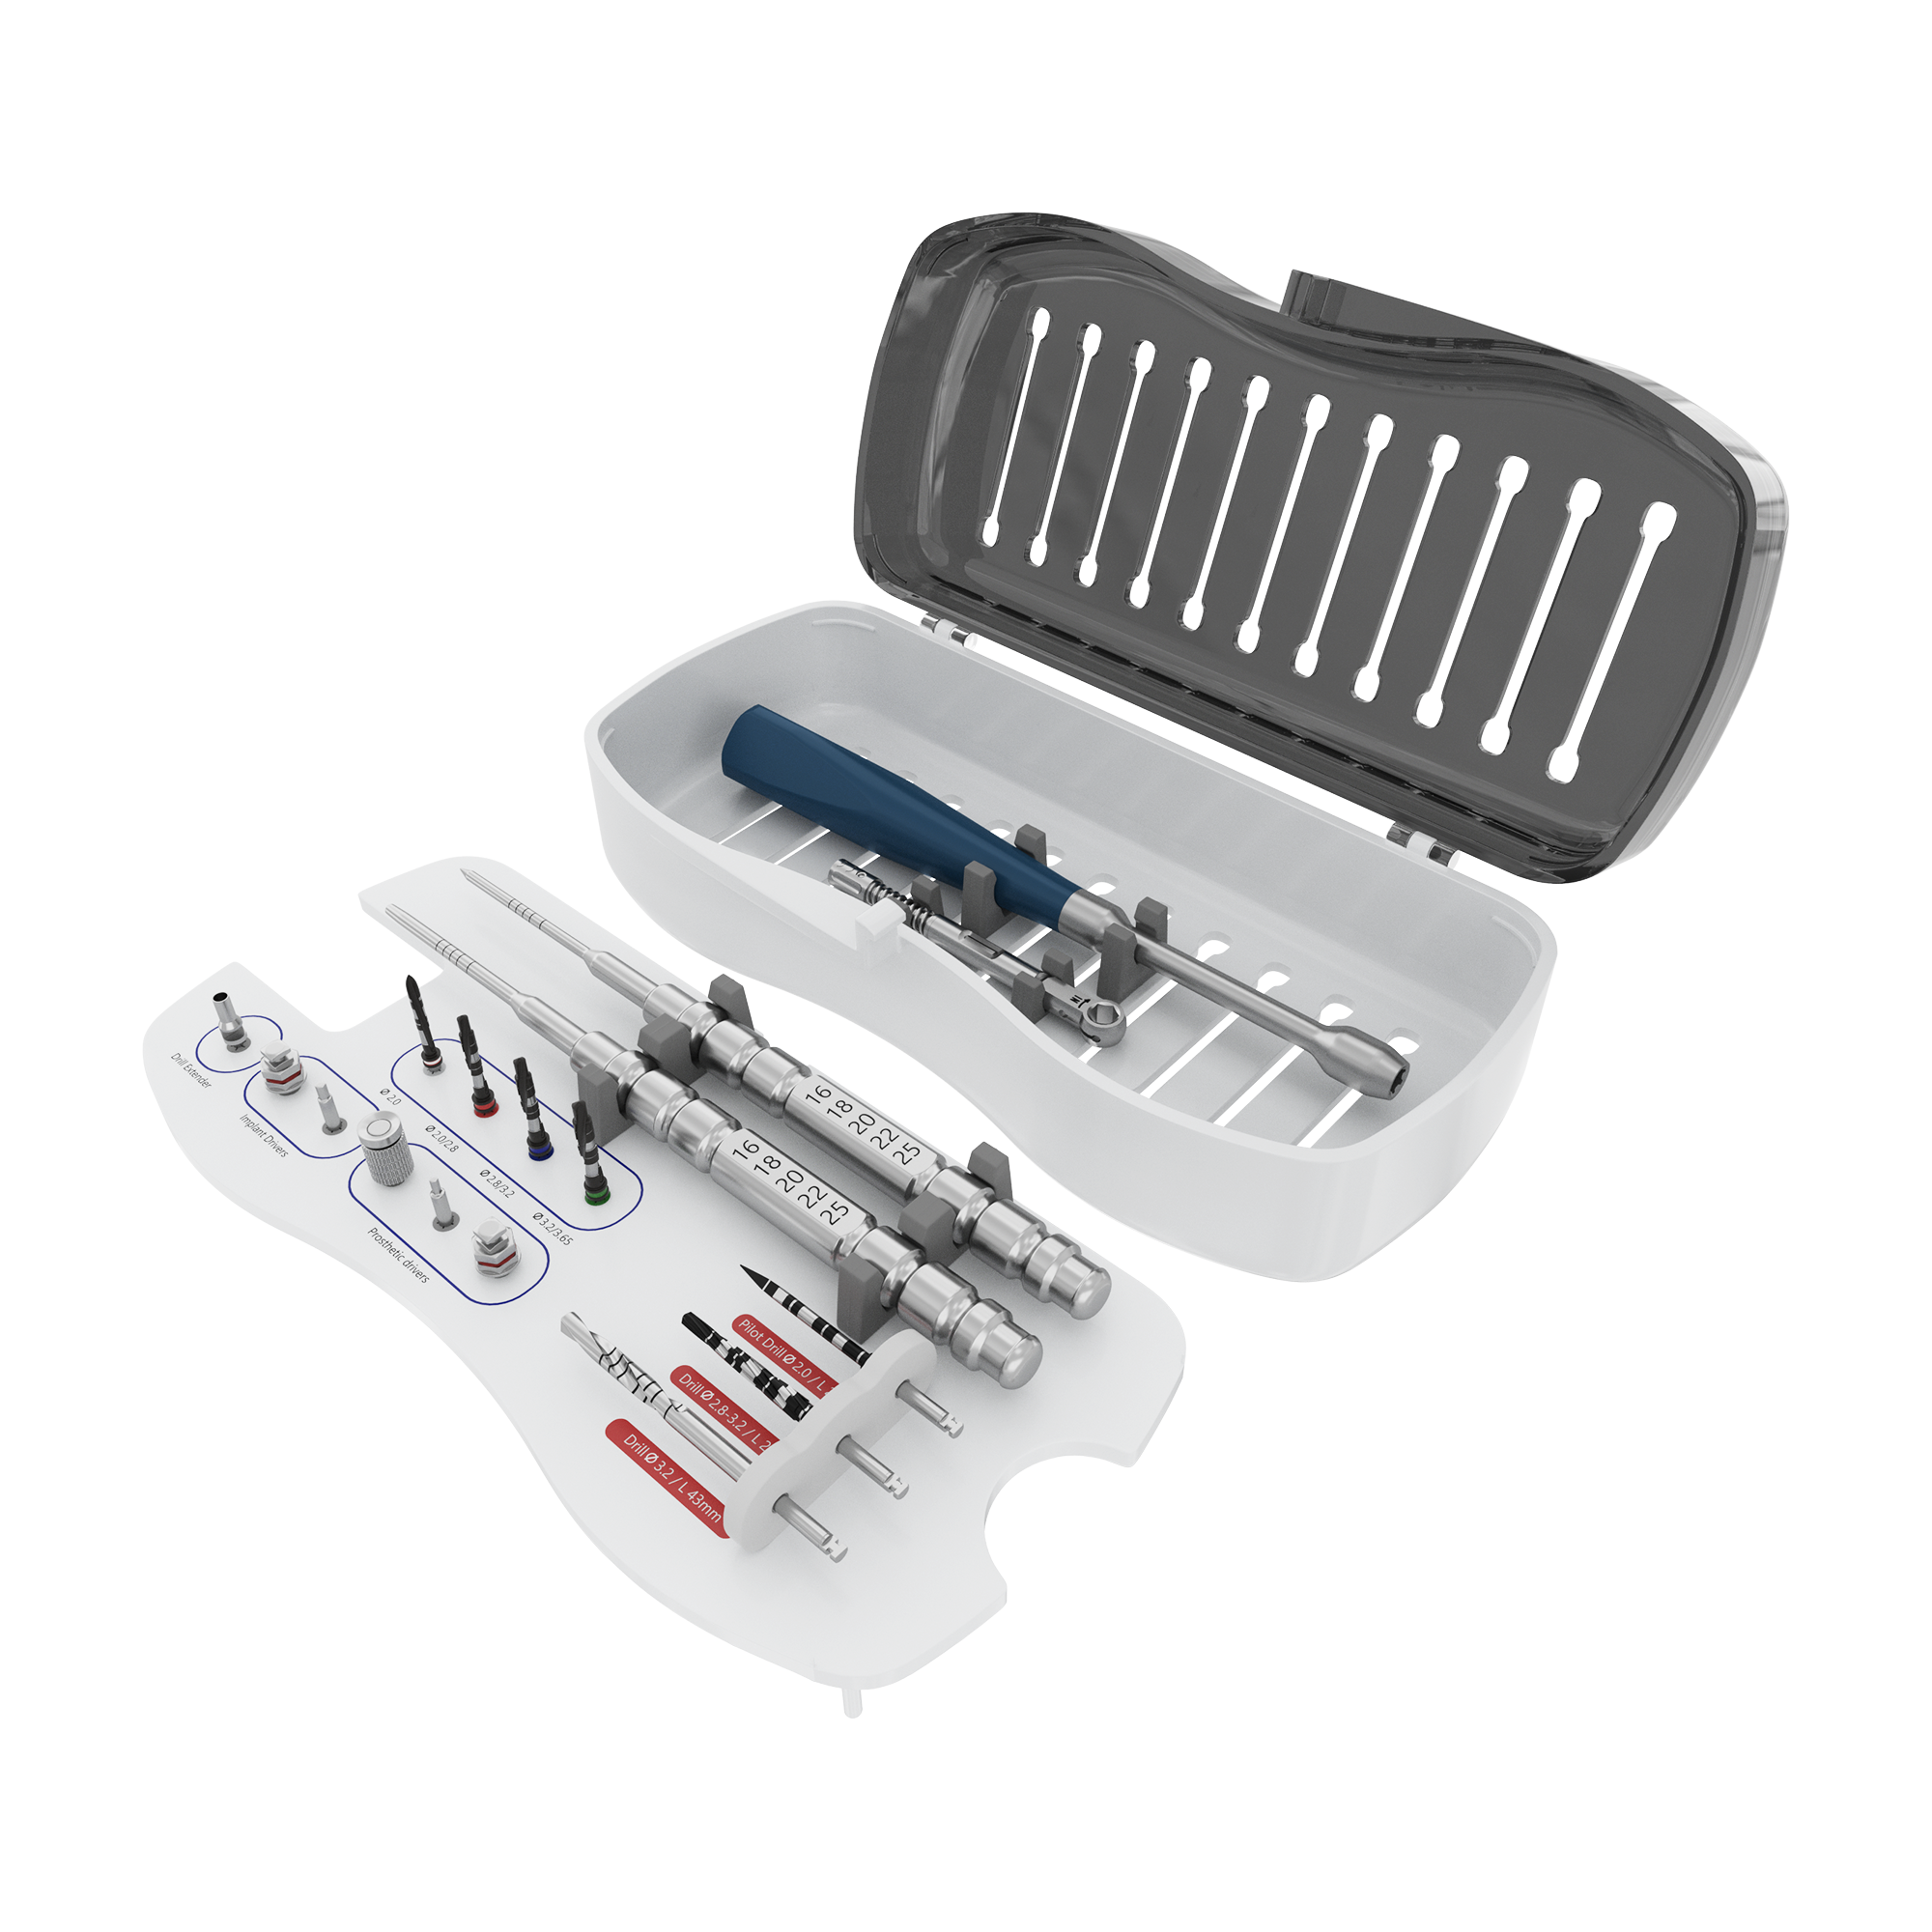 DSI SK-DSY Grip Ptery Surgical Kit For Implant Installation